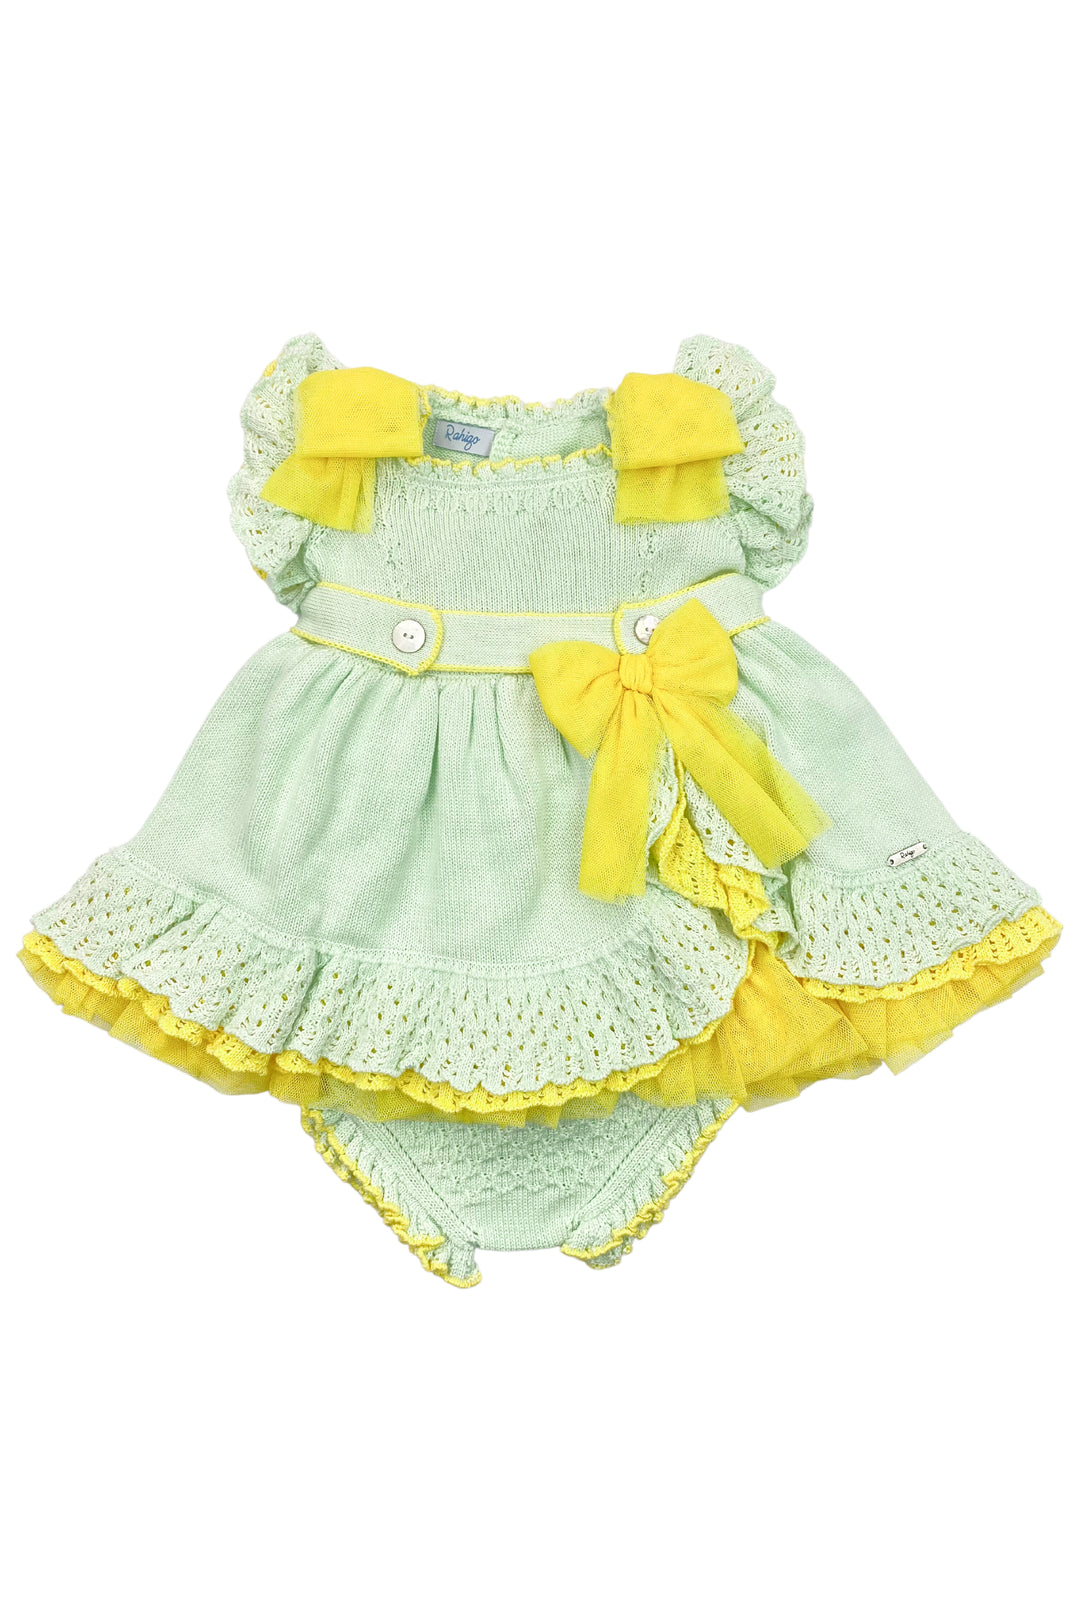 Rahigo "Beatrice" Mint & Yellow Knit Tulle Dress & Bloomers | Millie and John